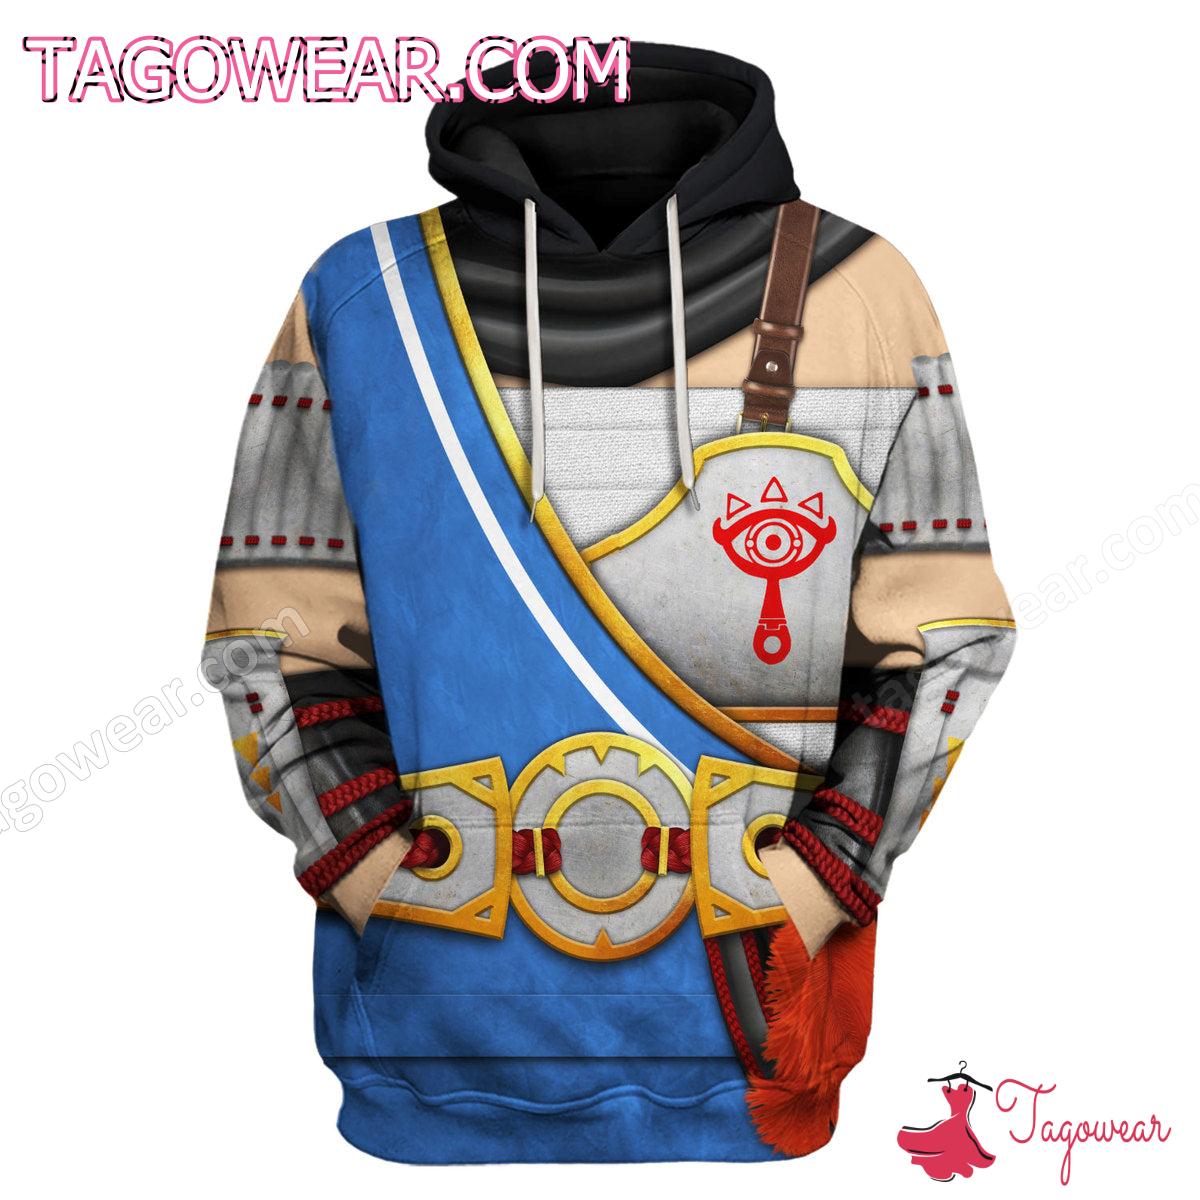 Impa The Legend Of Zelda Costumes Shirt, Hoodie And Pants